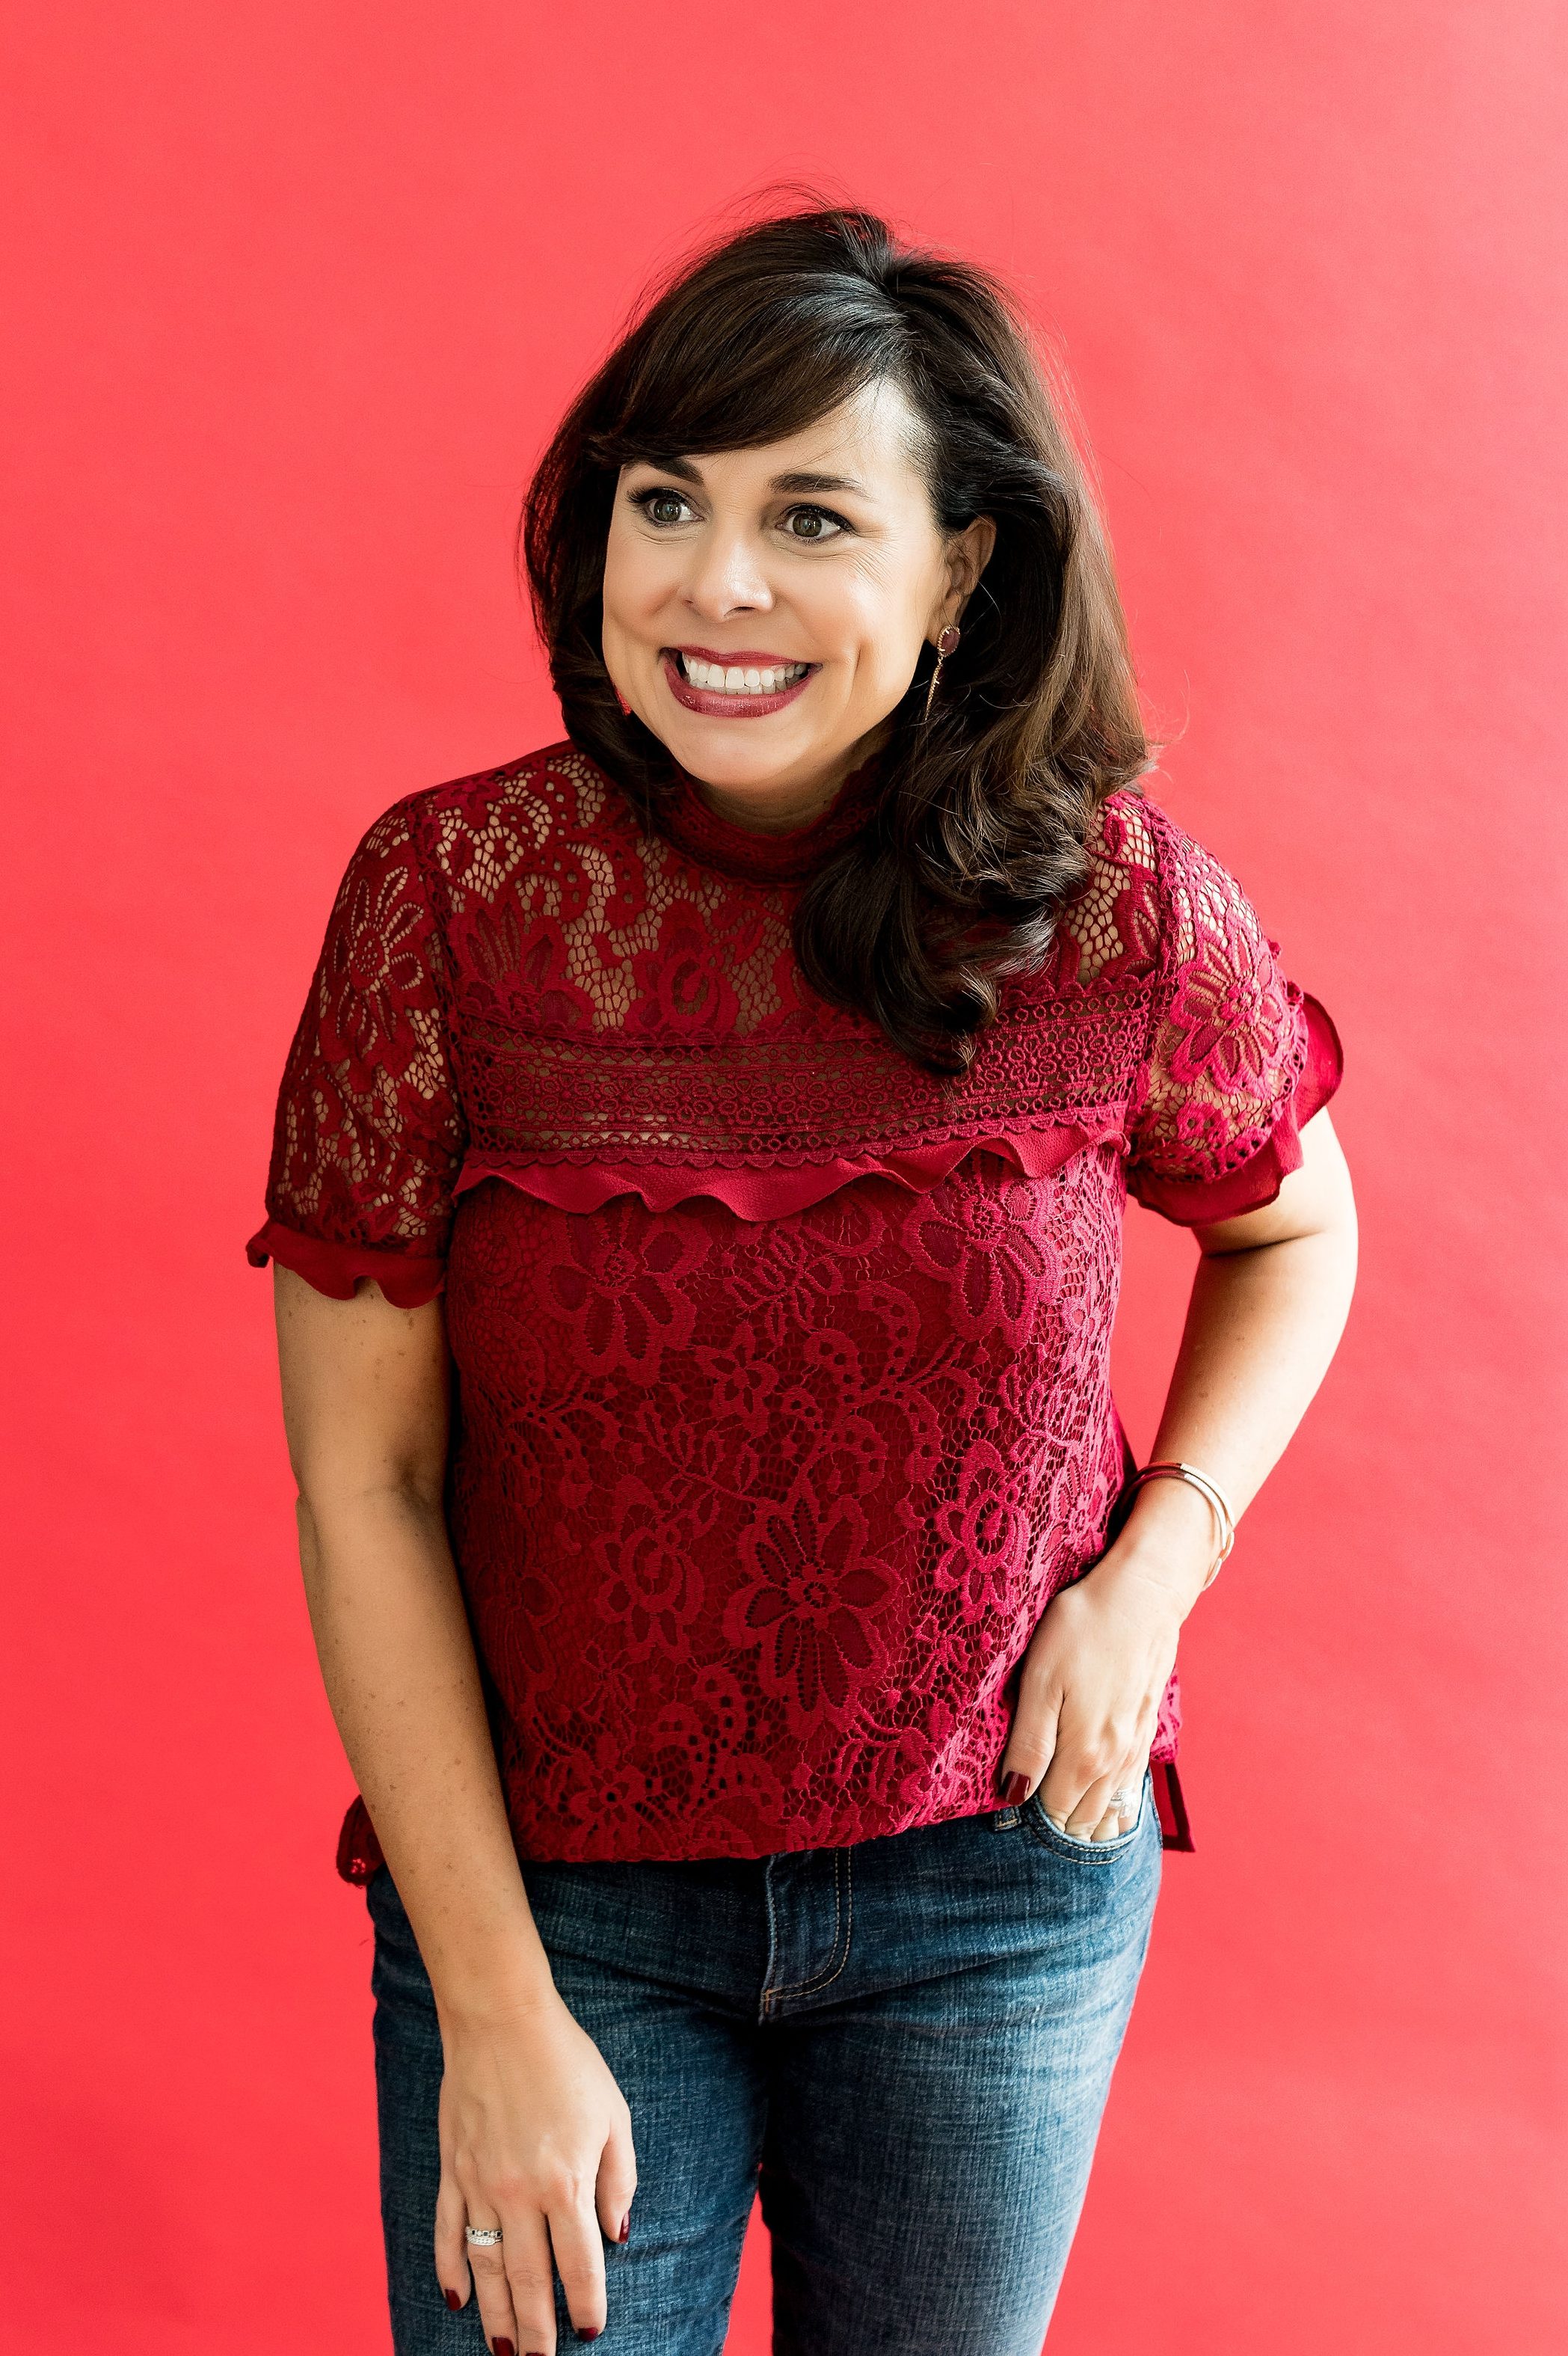 holiday outfit ideas from the gibson glam collection - red sheaffer lace top